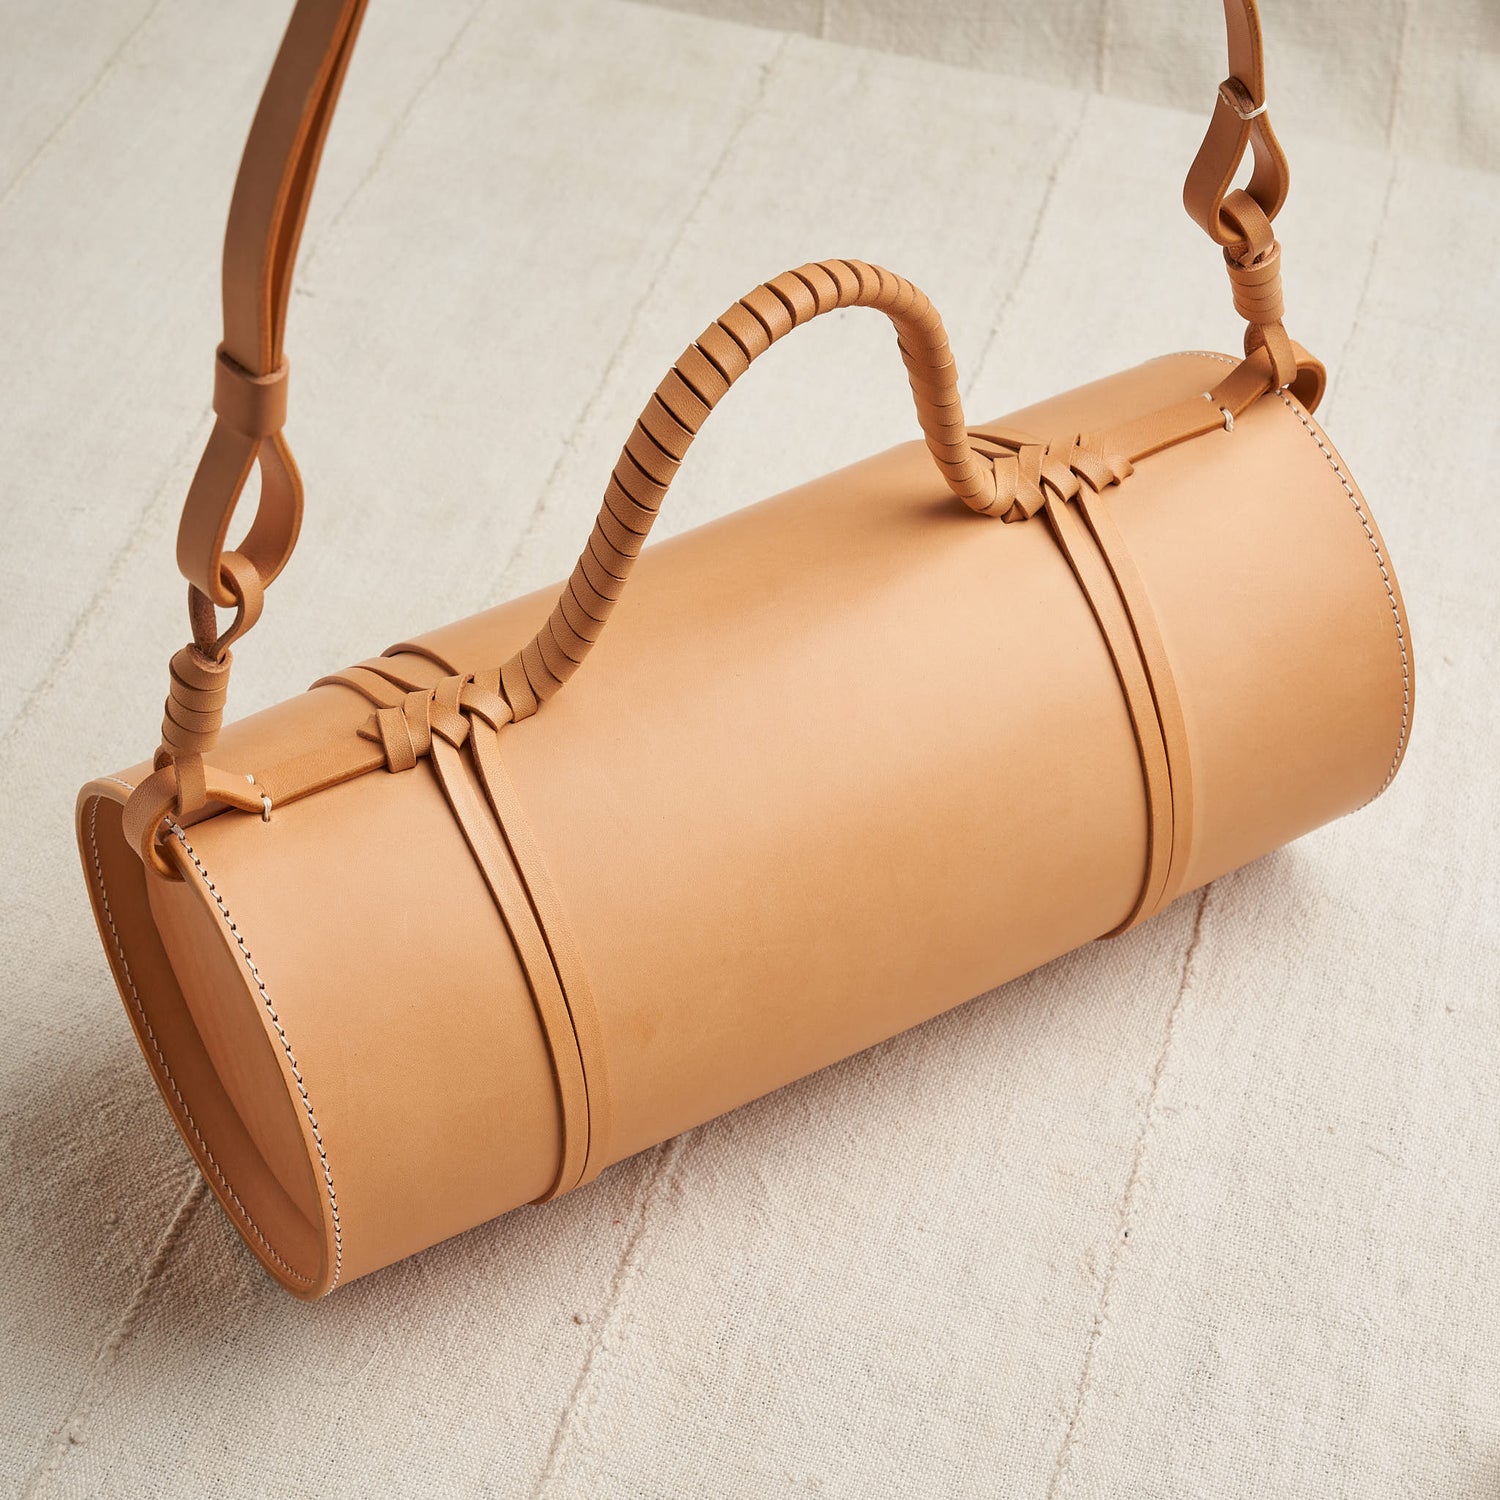 Woven Bamboo Bag, Natural Vegetable Tanned Leather